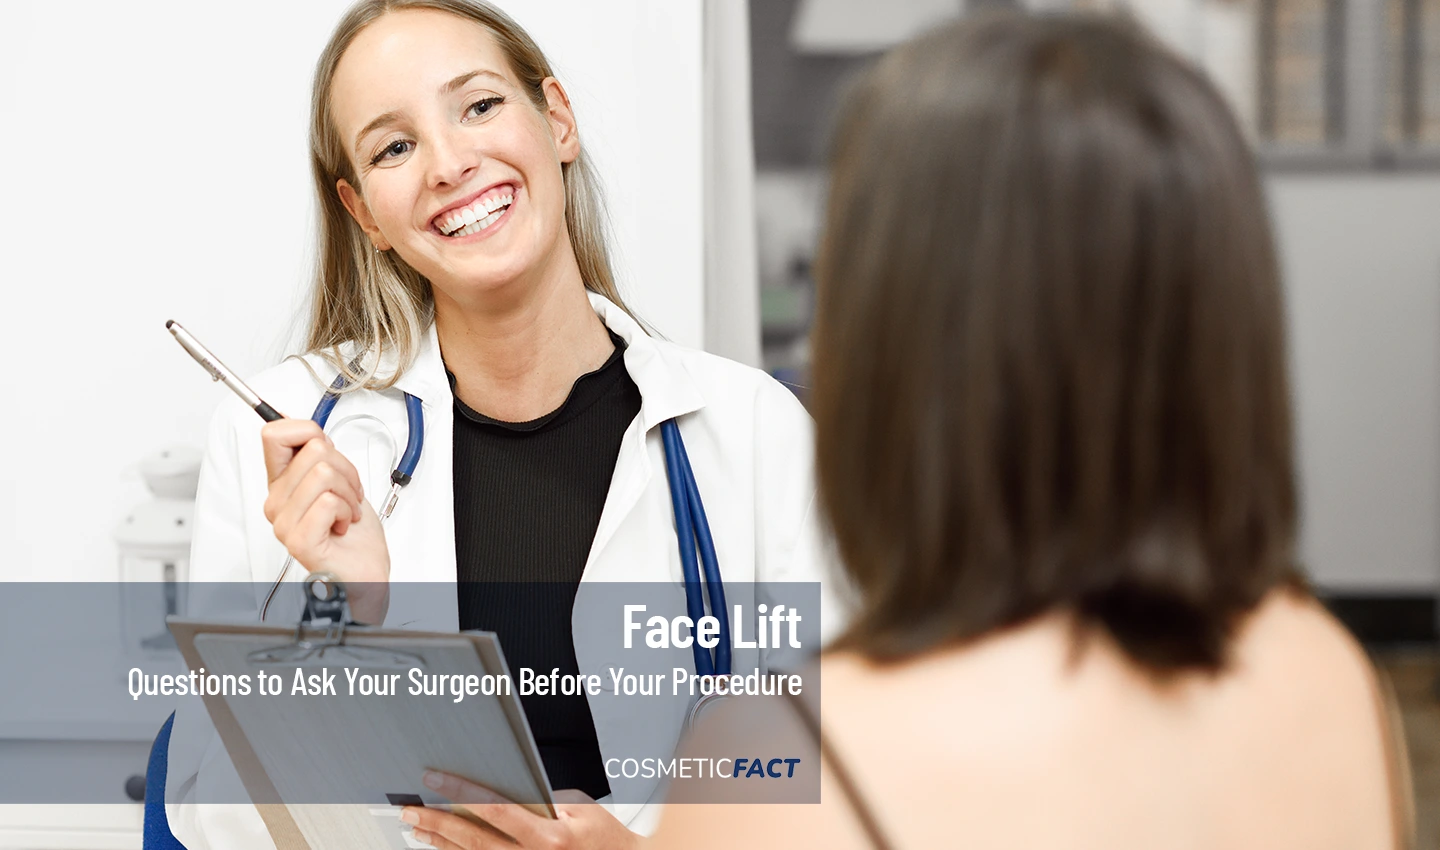 A patient asking facelift surgery questions from a plastic surgeon